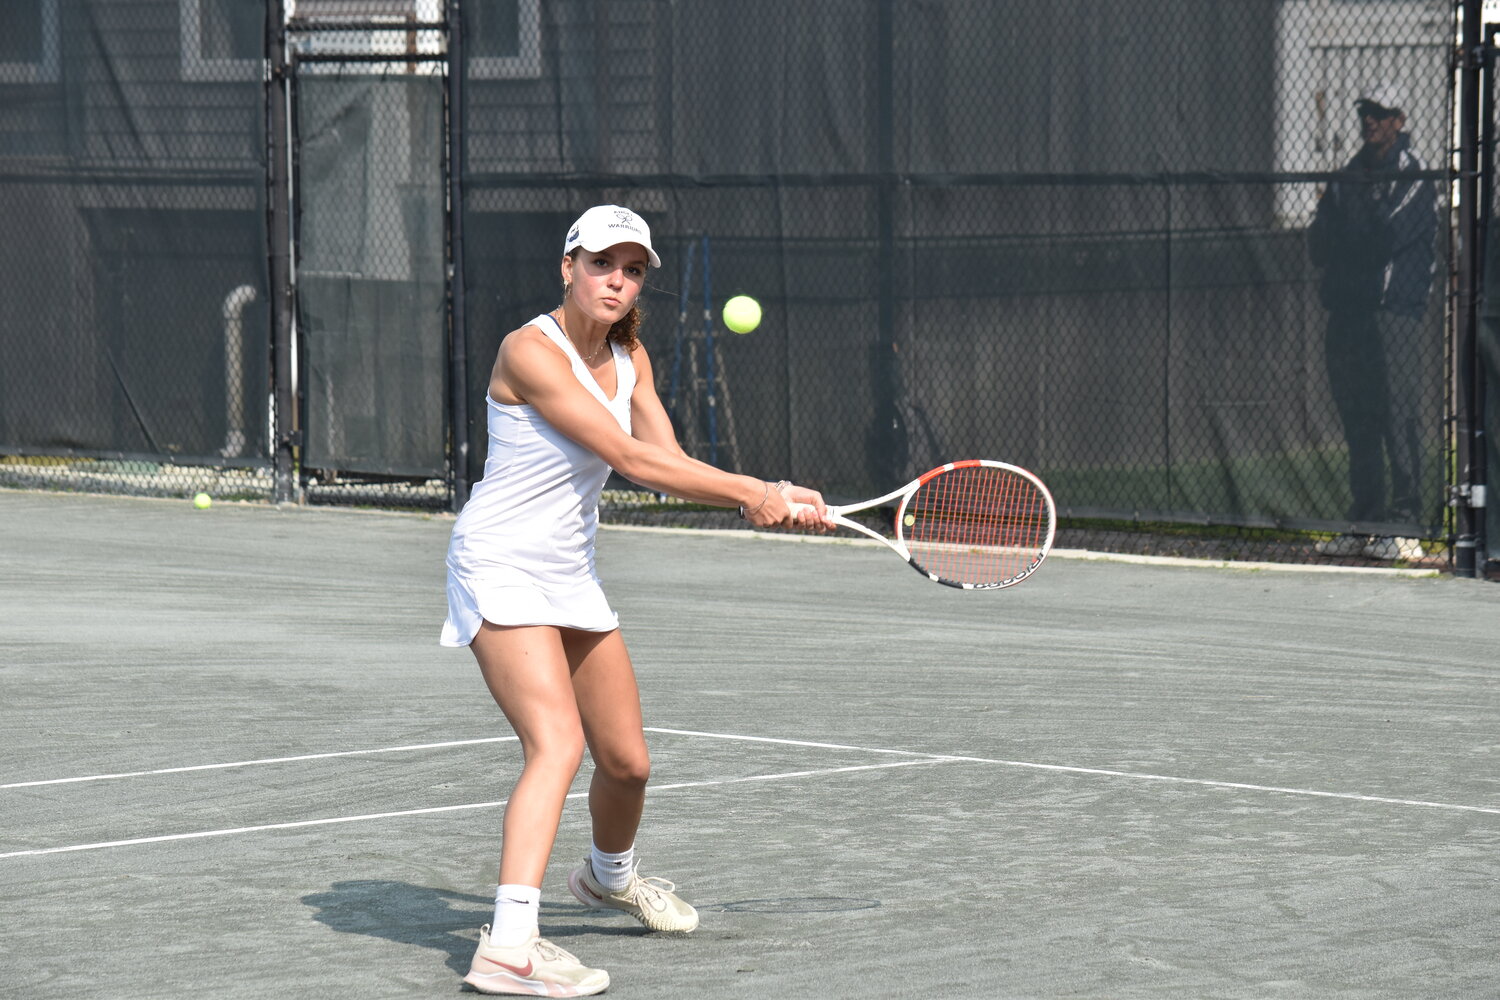 Chloe Marrero lines up a backhand during Monday’s match against Sturgis West.